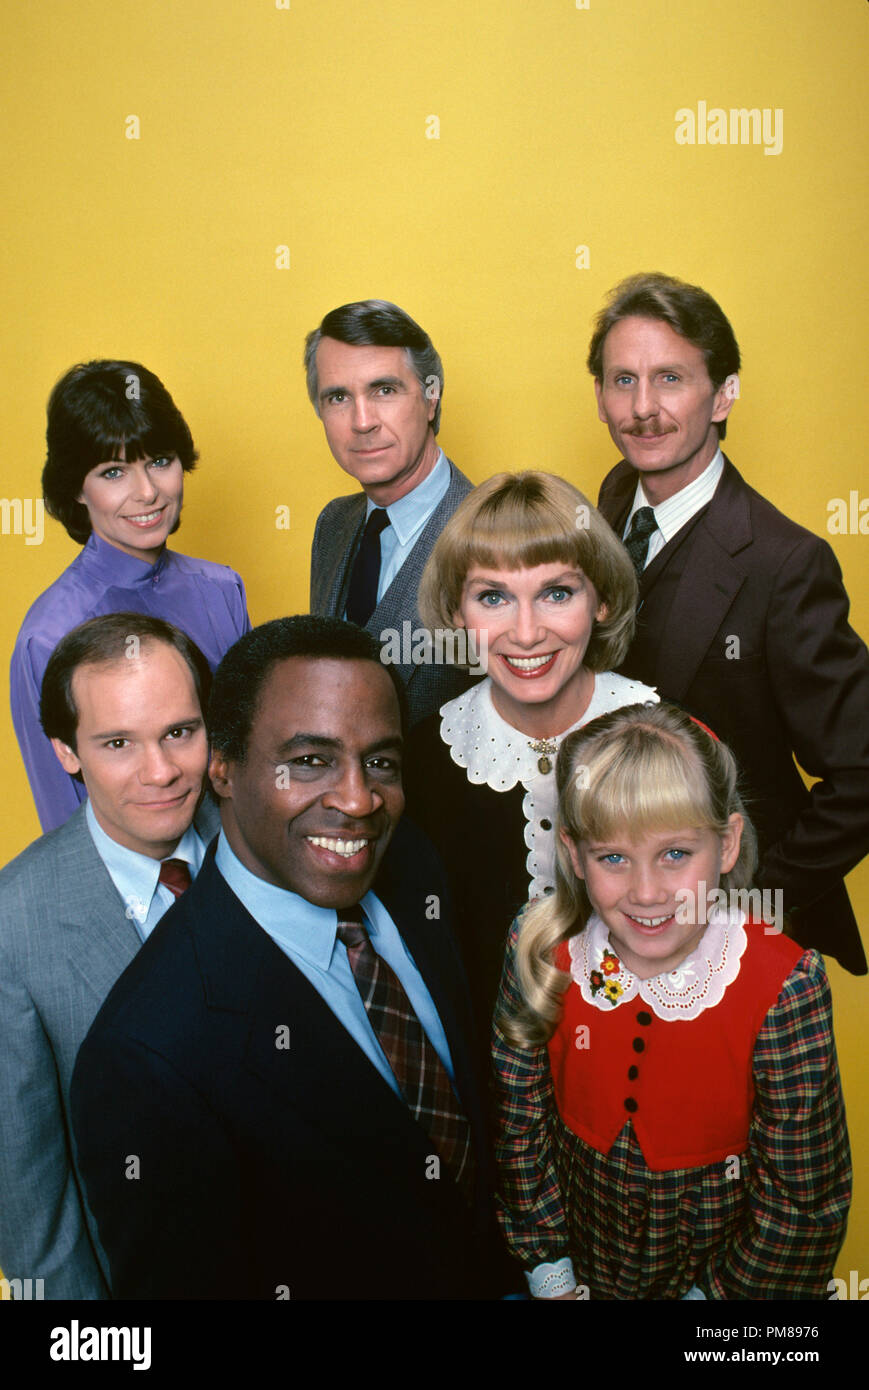 Studio Publicity Still from 'Benson' Inga Swenson, James Noble, Rene Auberjonois, Robert Guillaume circa 1984   All Rights Reserved   File Reference # 31706362THA  For Editorial Use Only Stock Photo